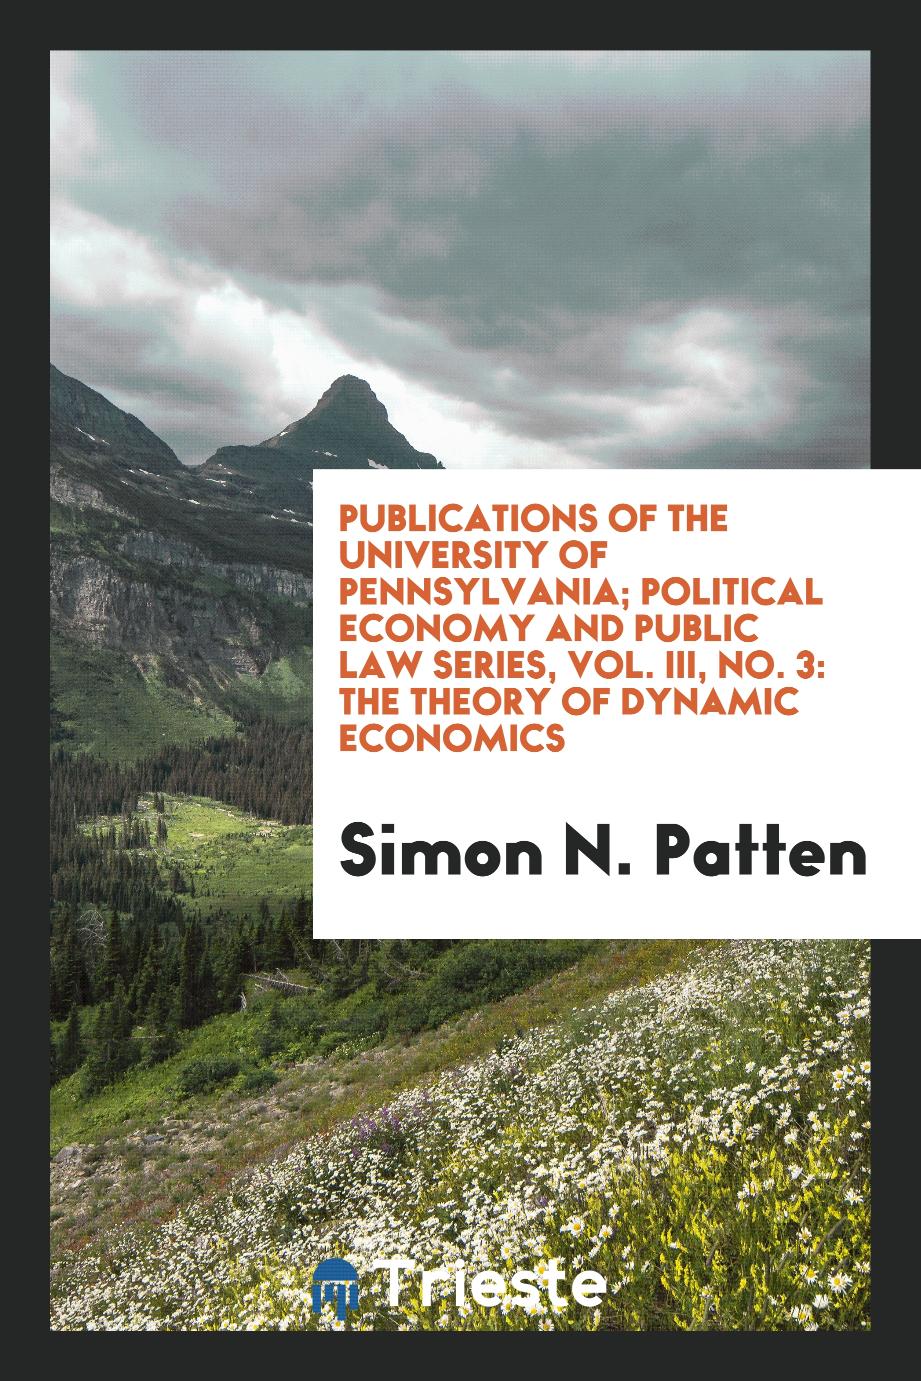 Publications of the University of Pennsylvania; Political Economy and Public Law Series, Vol. III, No. 3: The Theory of Dynamic Economics